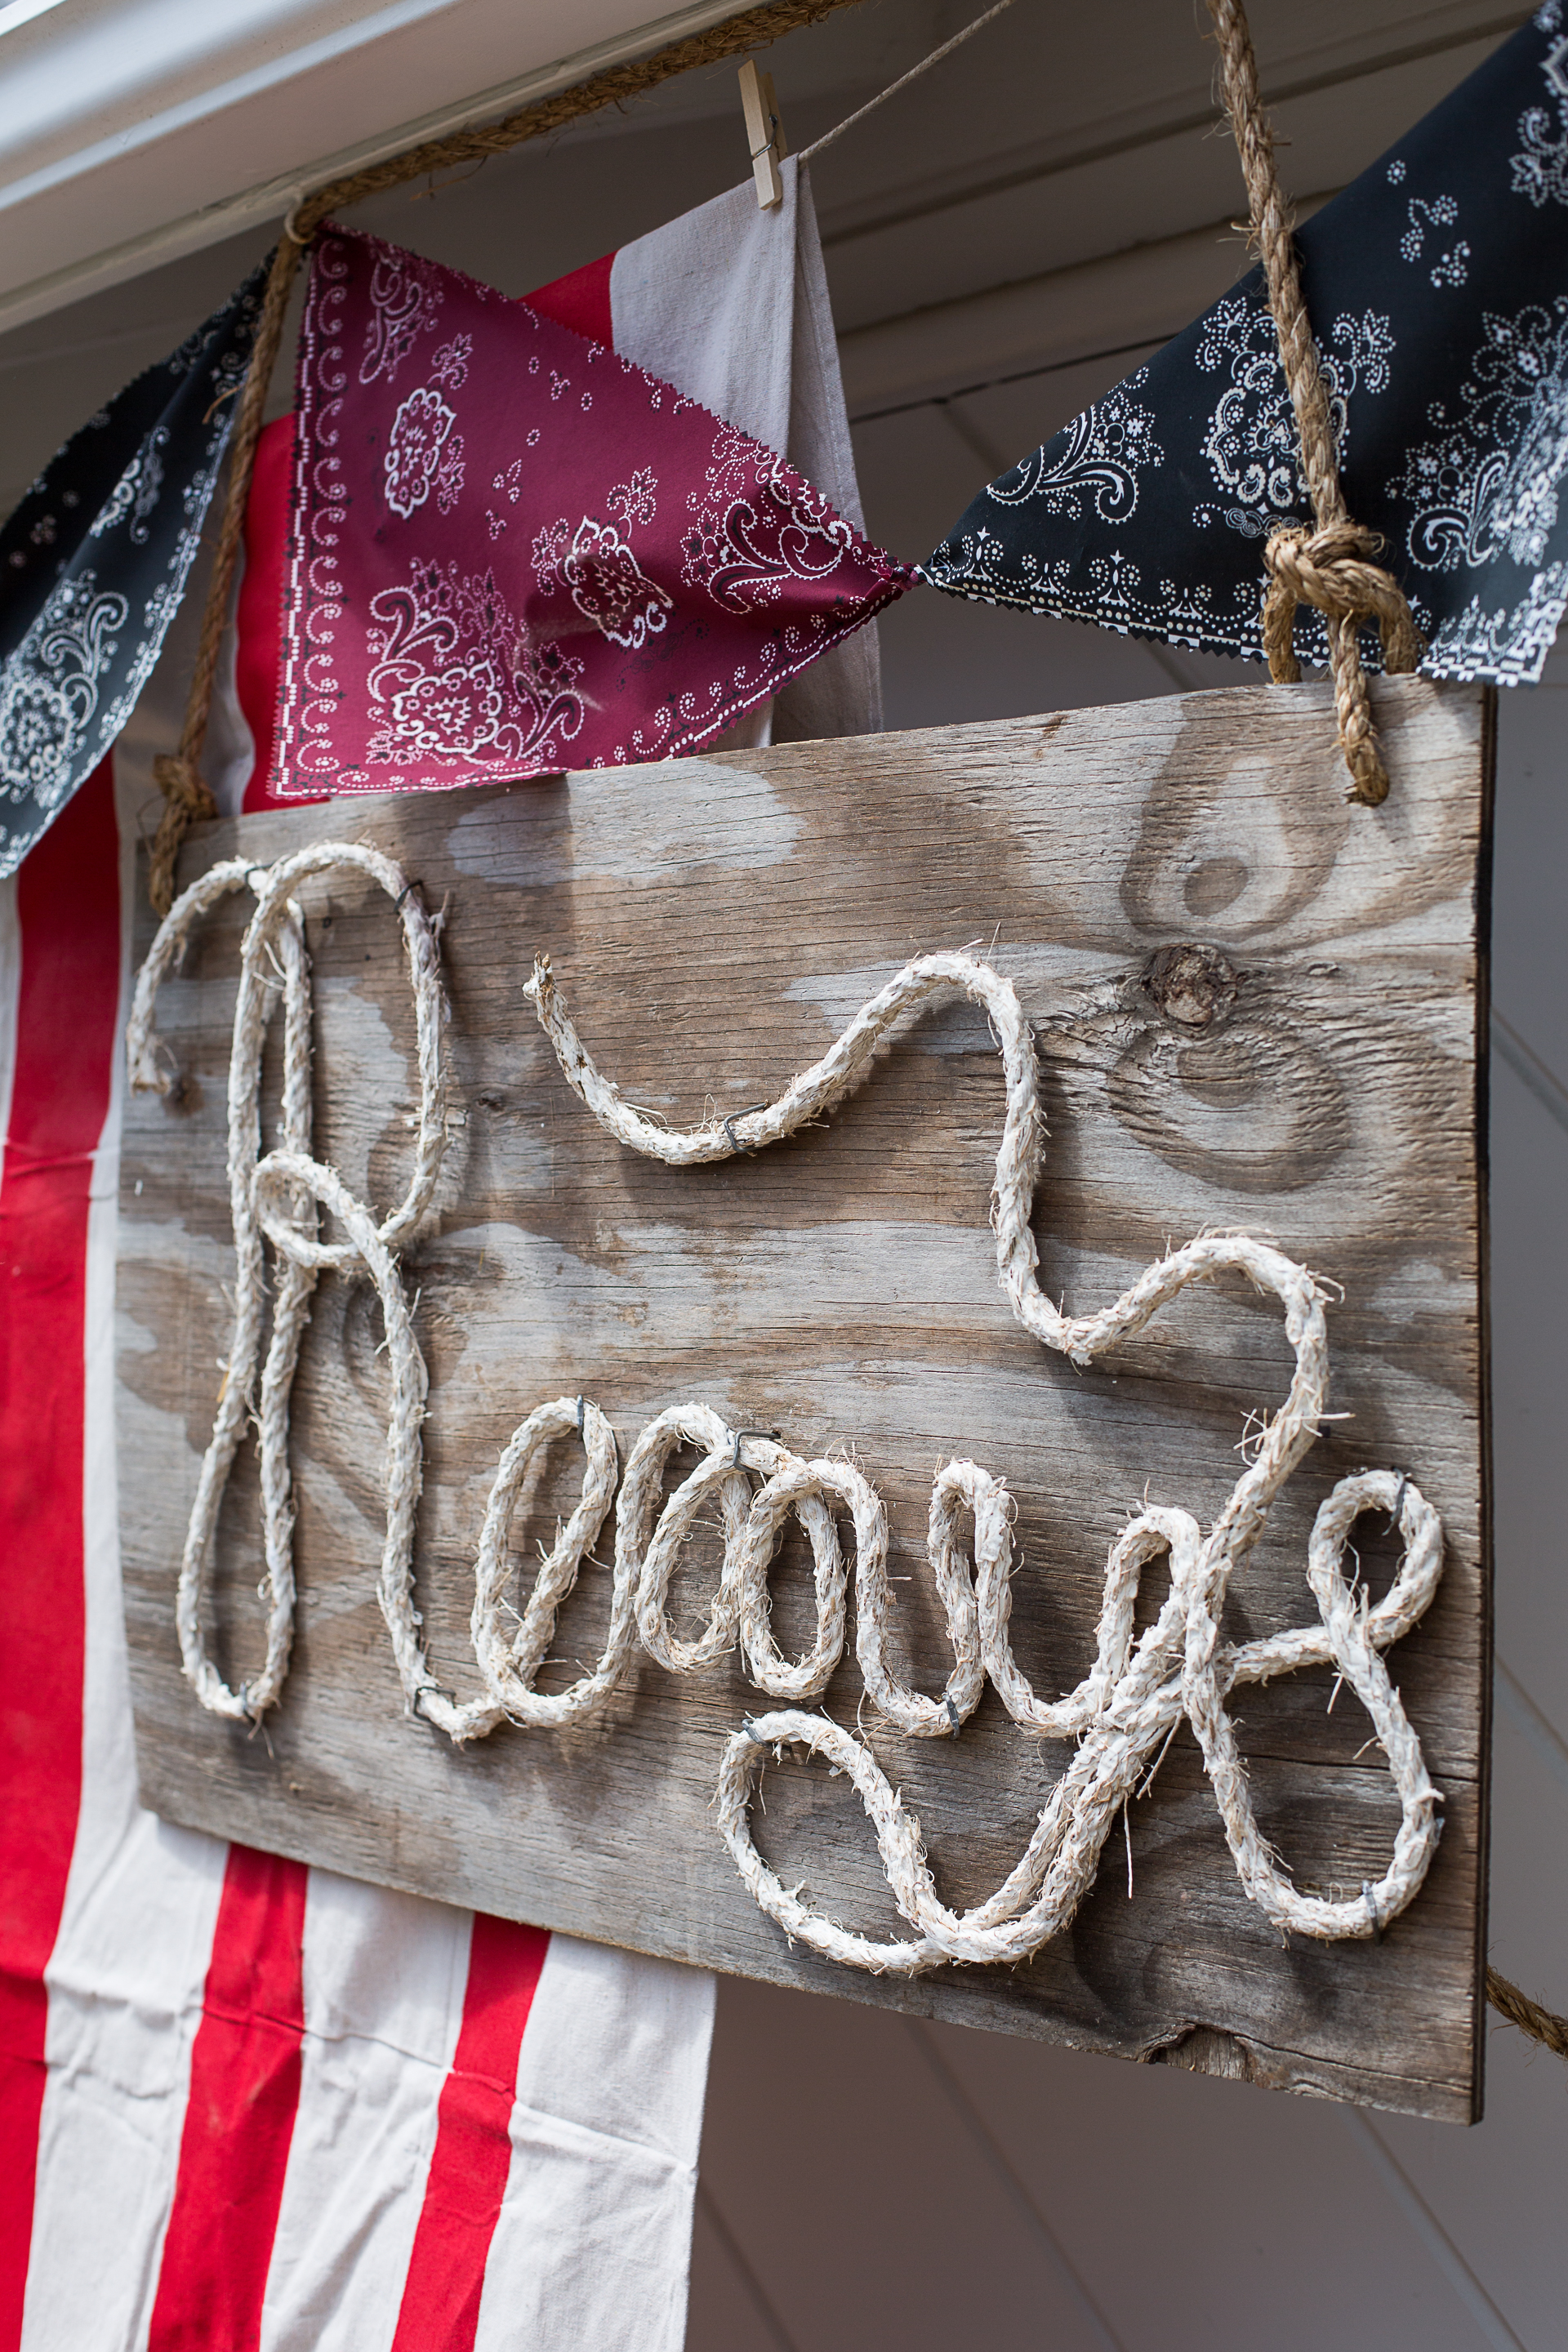  A DIY rope sign (so simple!).&nbsp; Follow the instructions available at Love Grows Wild (http://lovegrowswild.com/2013/08/how-to-make-rope-letters/).&nbsp; I used hemp rope because that is what I had laying around. 